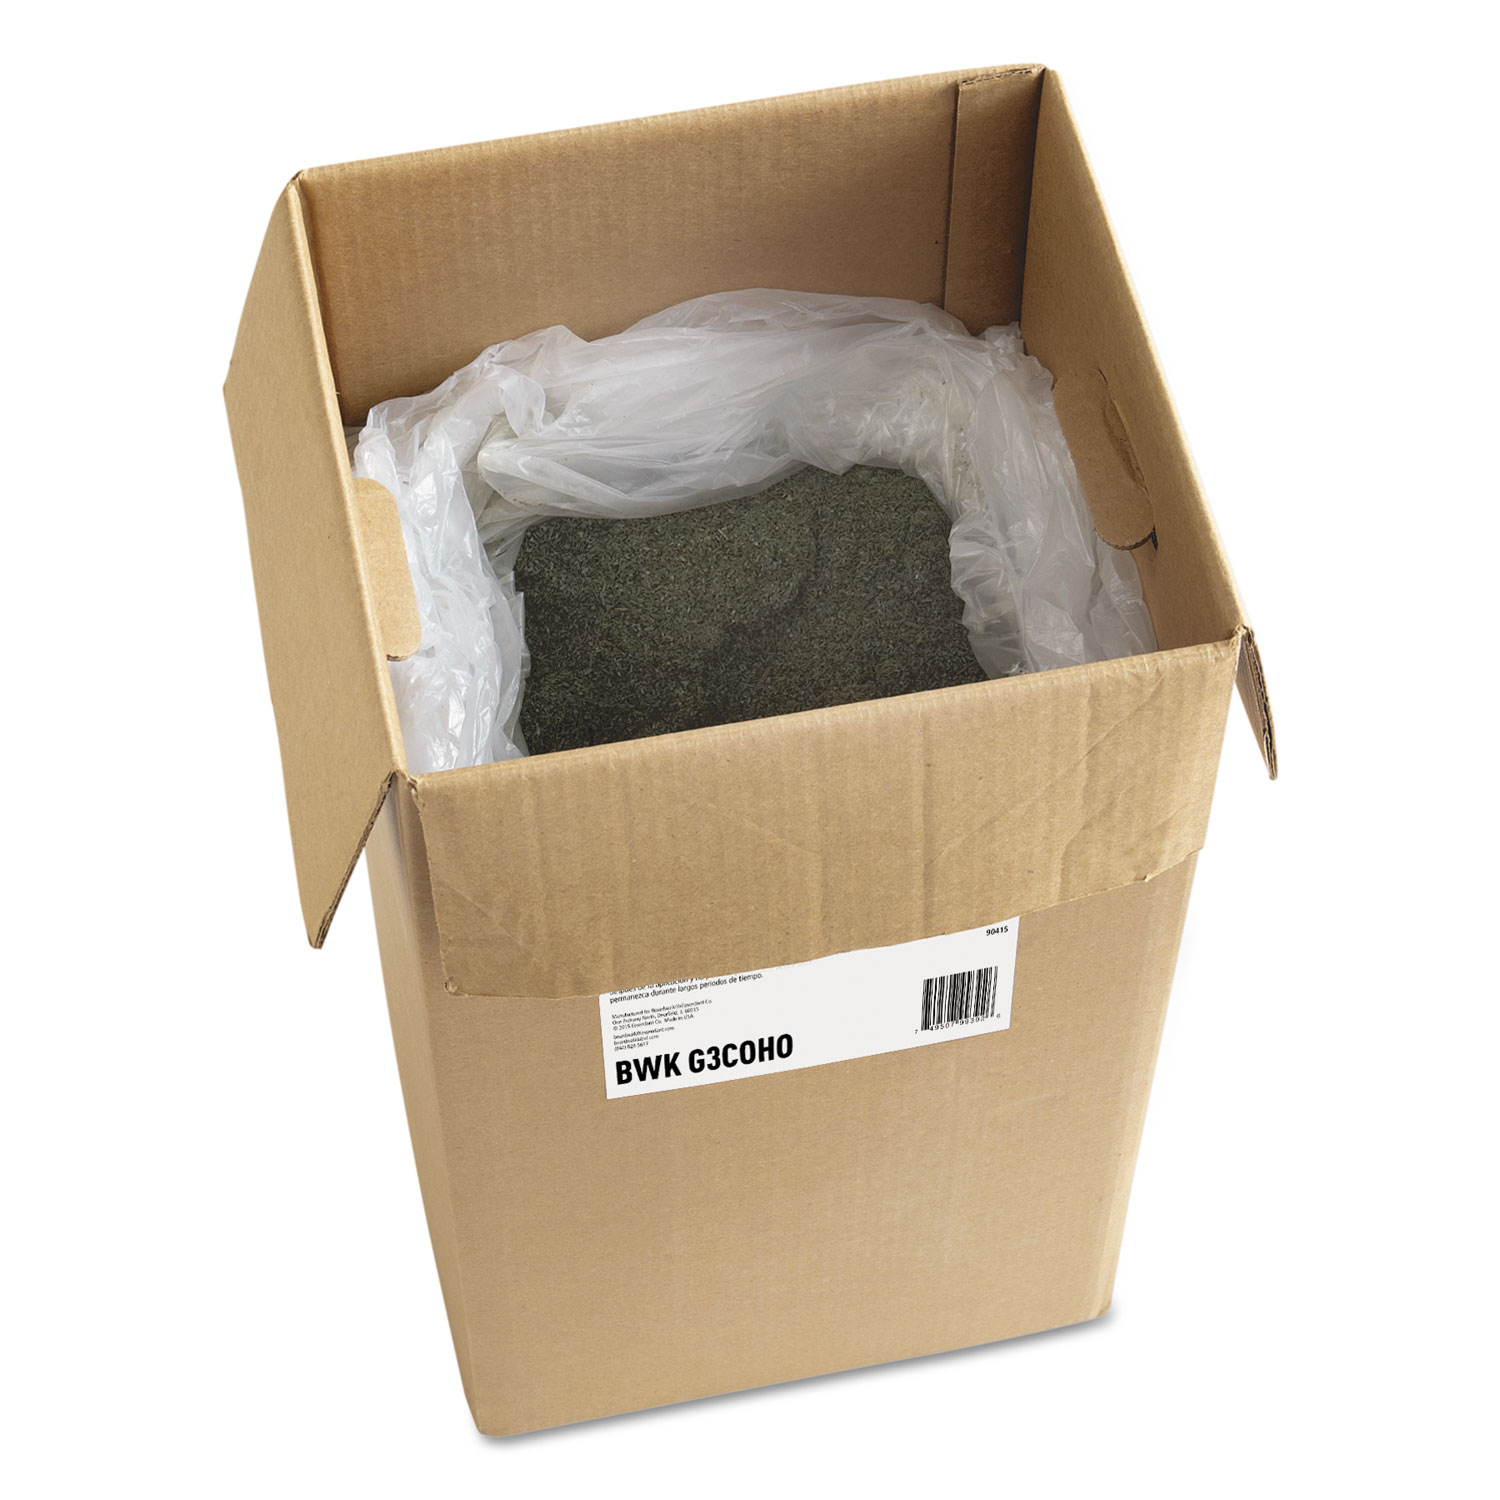  Boardwalk BWKG3COHO Oil-Based Sweeping Compound, Grit-Free, Green, 50lbs, Box (BWKG3COHO) 